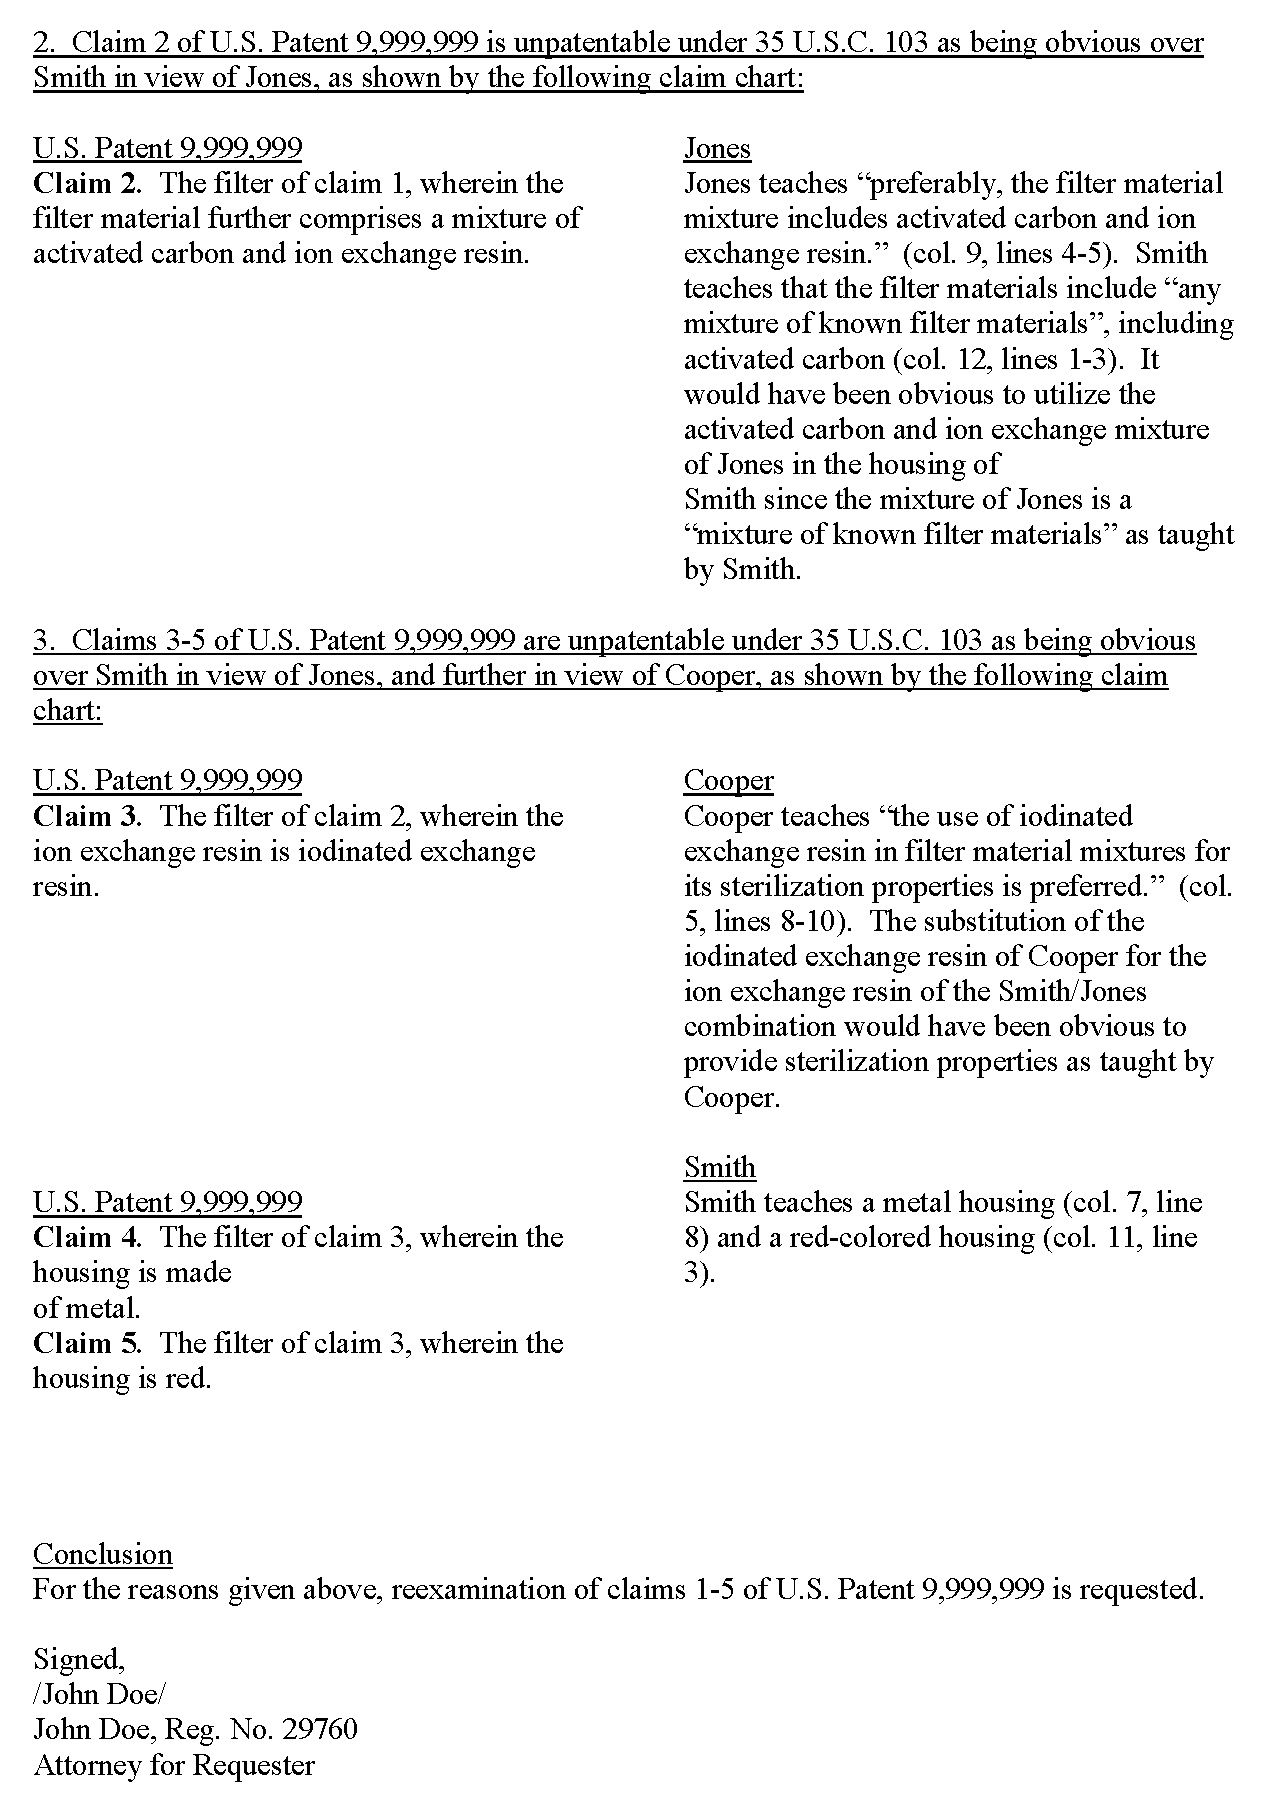 Request for Reexamination of U.S. Patent 9,999,999 (Page 2)